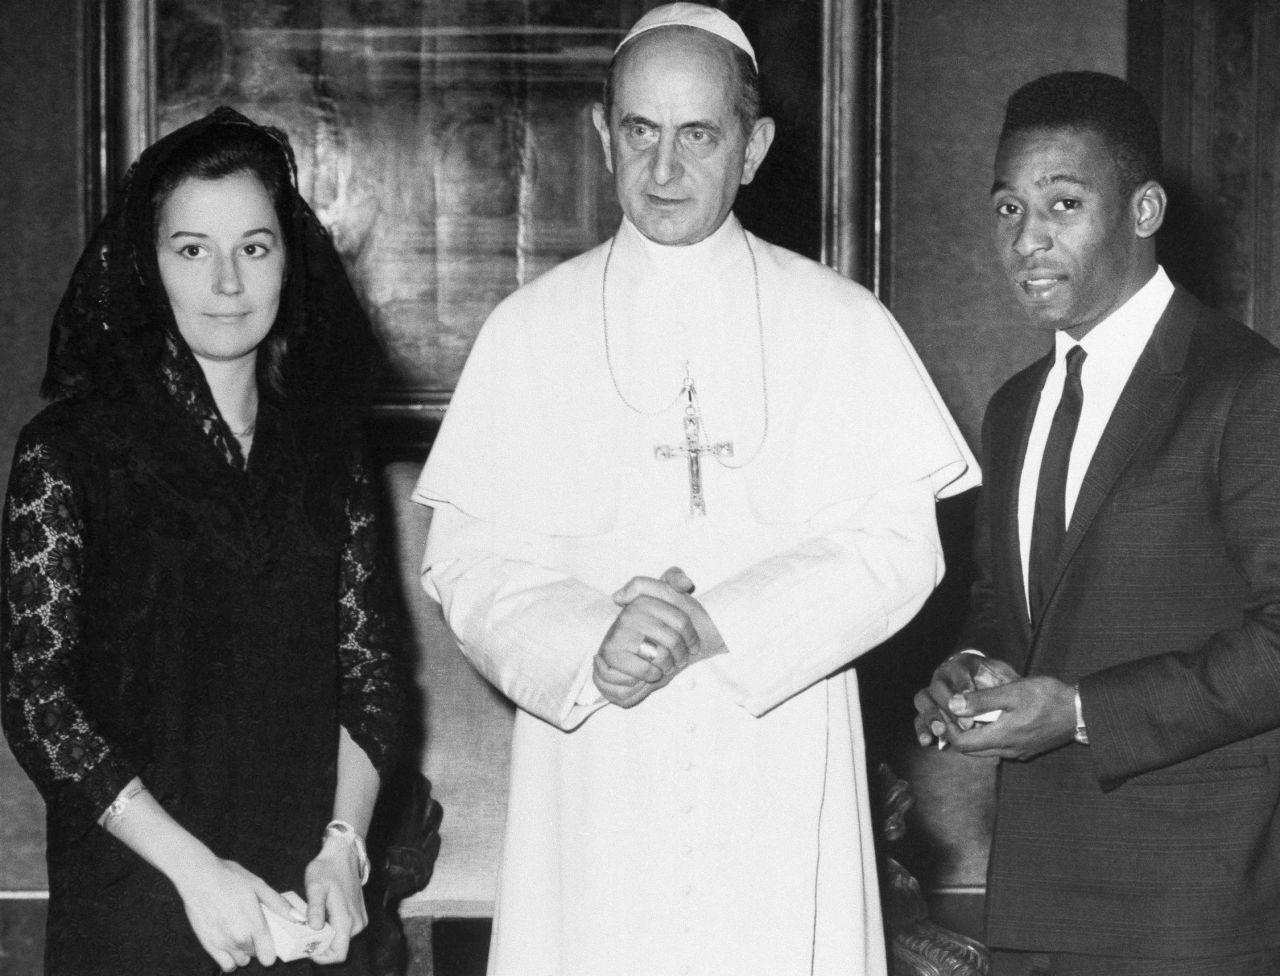 Pelé and his archetypal  wife, Rosemeri, conscionable   Pope Paul VI portion    visiting the Vatican successful  1966. The newlywed mates  had been honeymooning successful  Germany, Austria and Italy.